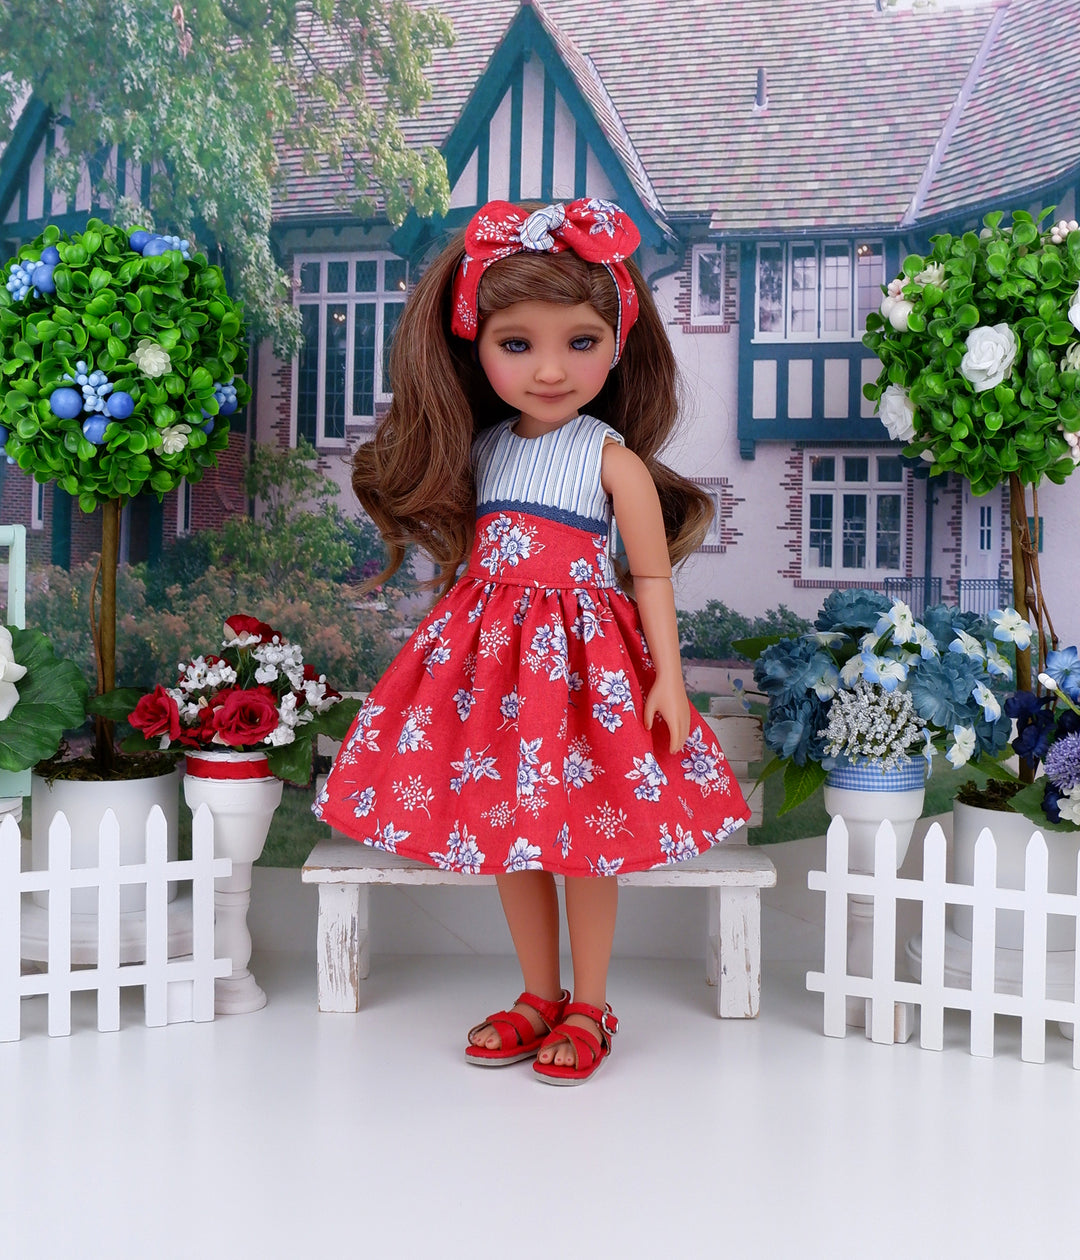 Floral Americana - dress and sandals for Ruby Red Fashion Friends doll